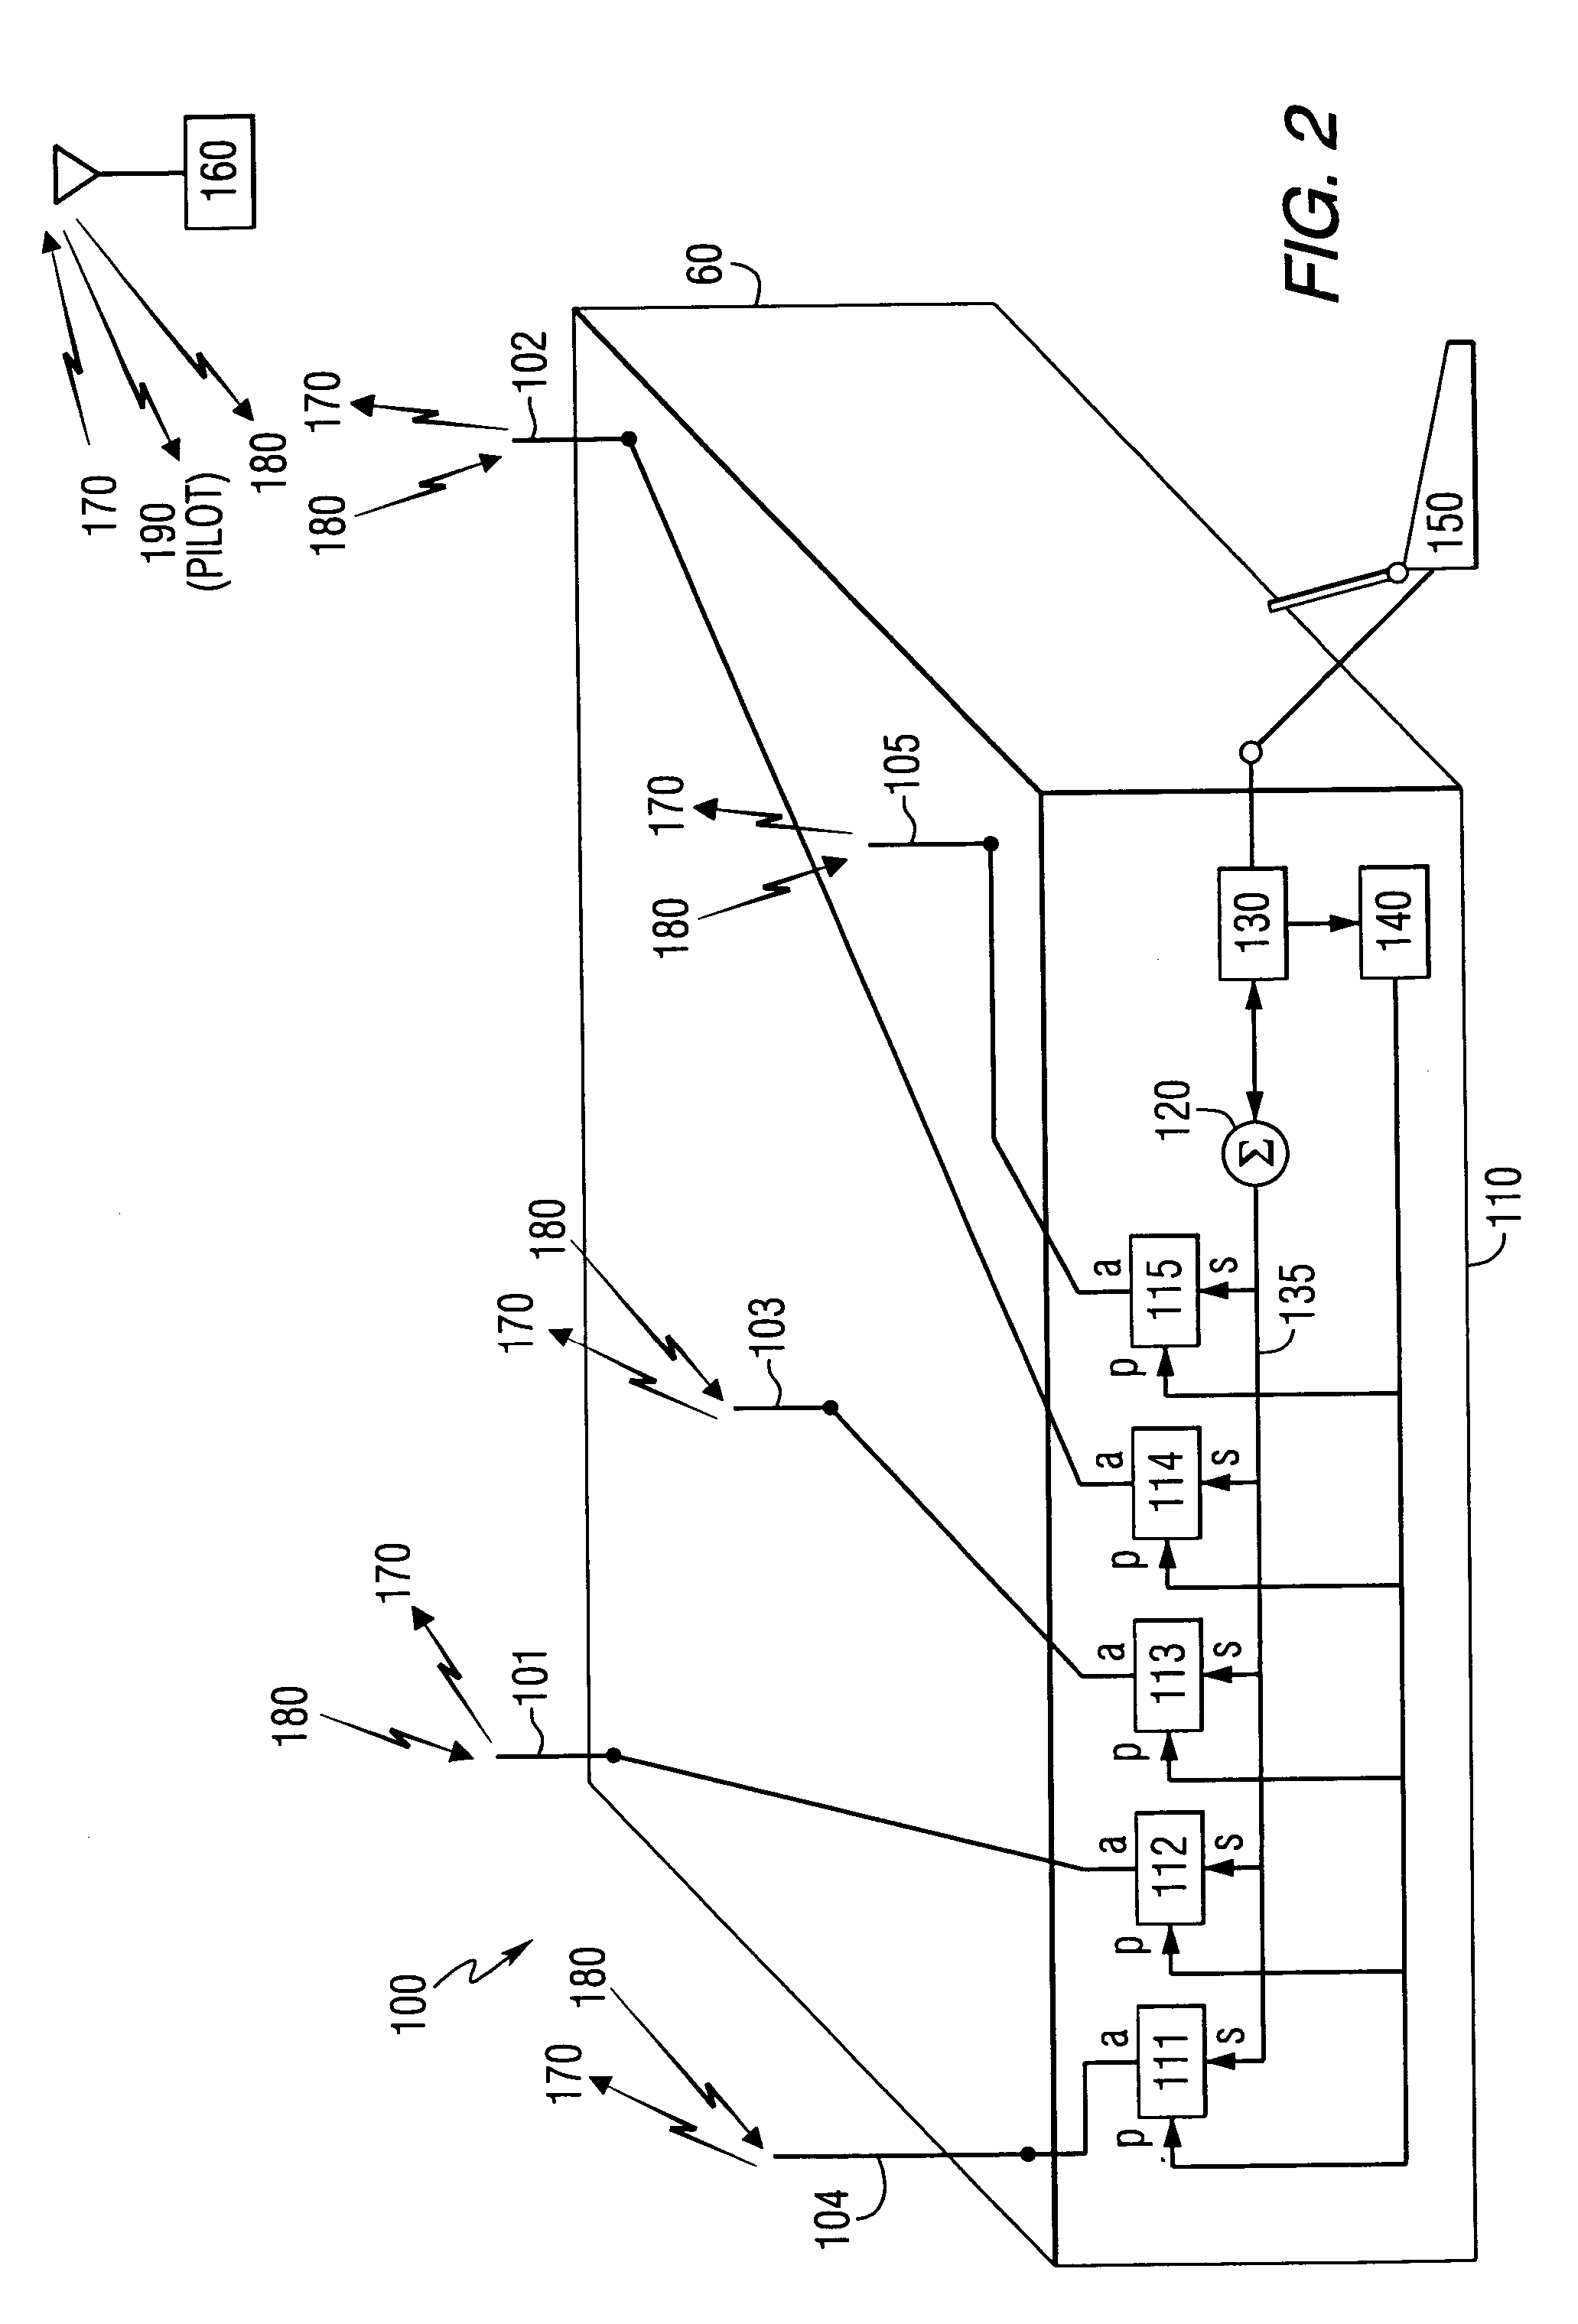 Method and apparatus for performing directional re-scan of an adaptive antenna